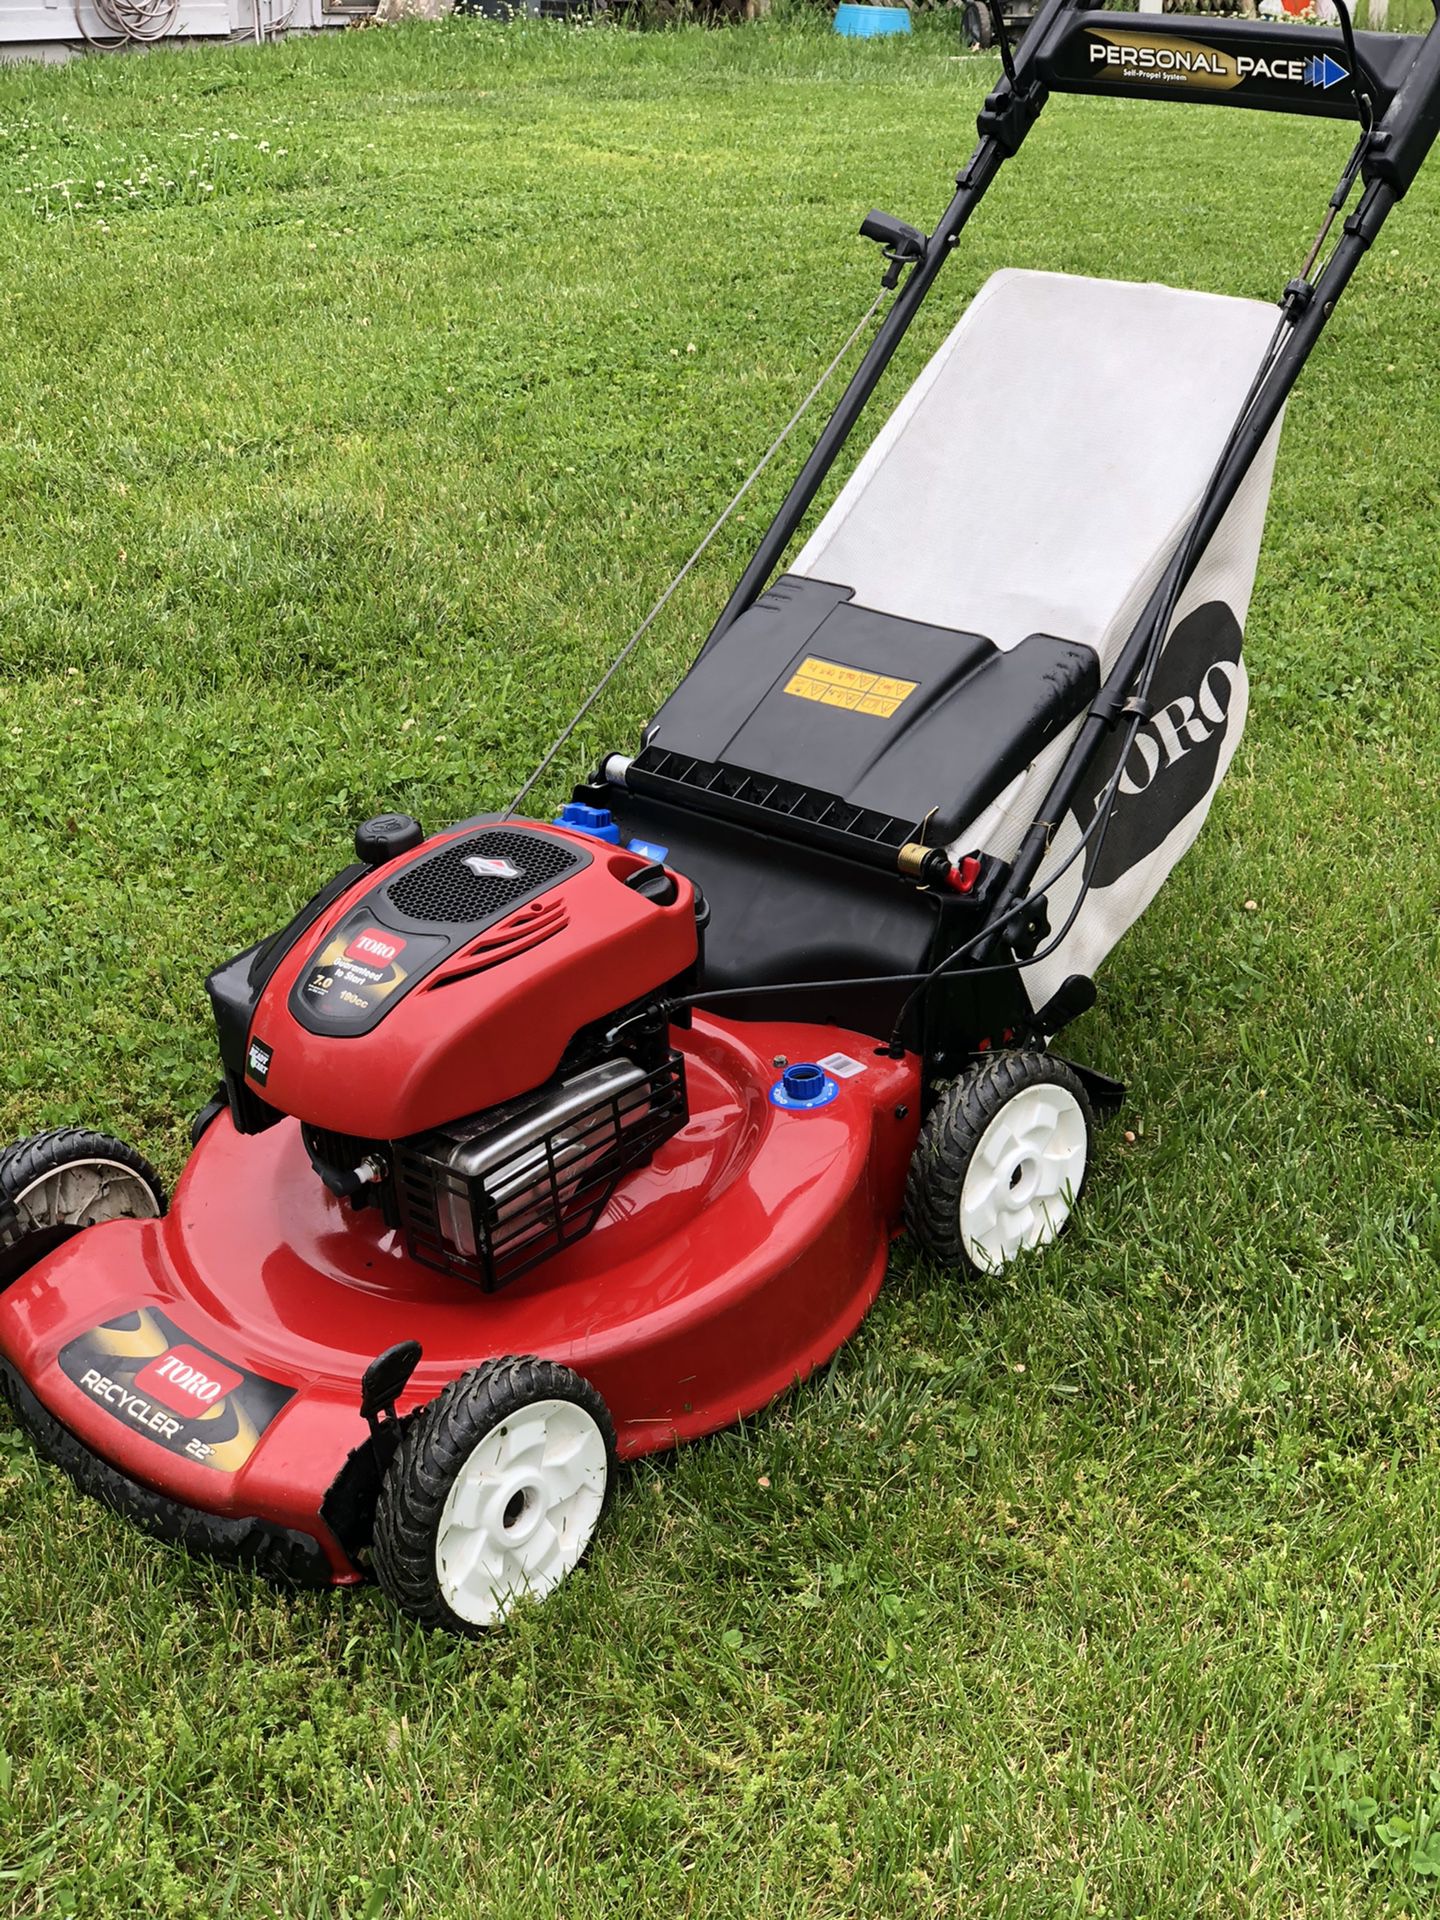 Toro recycler 22” lawn mower self propelled personal pace with bag in good working condition.